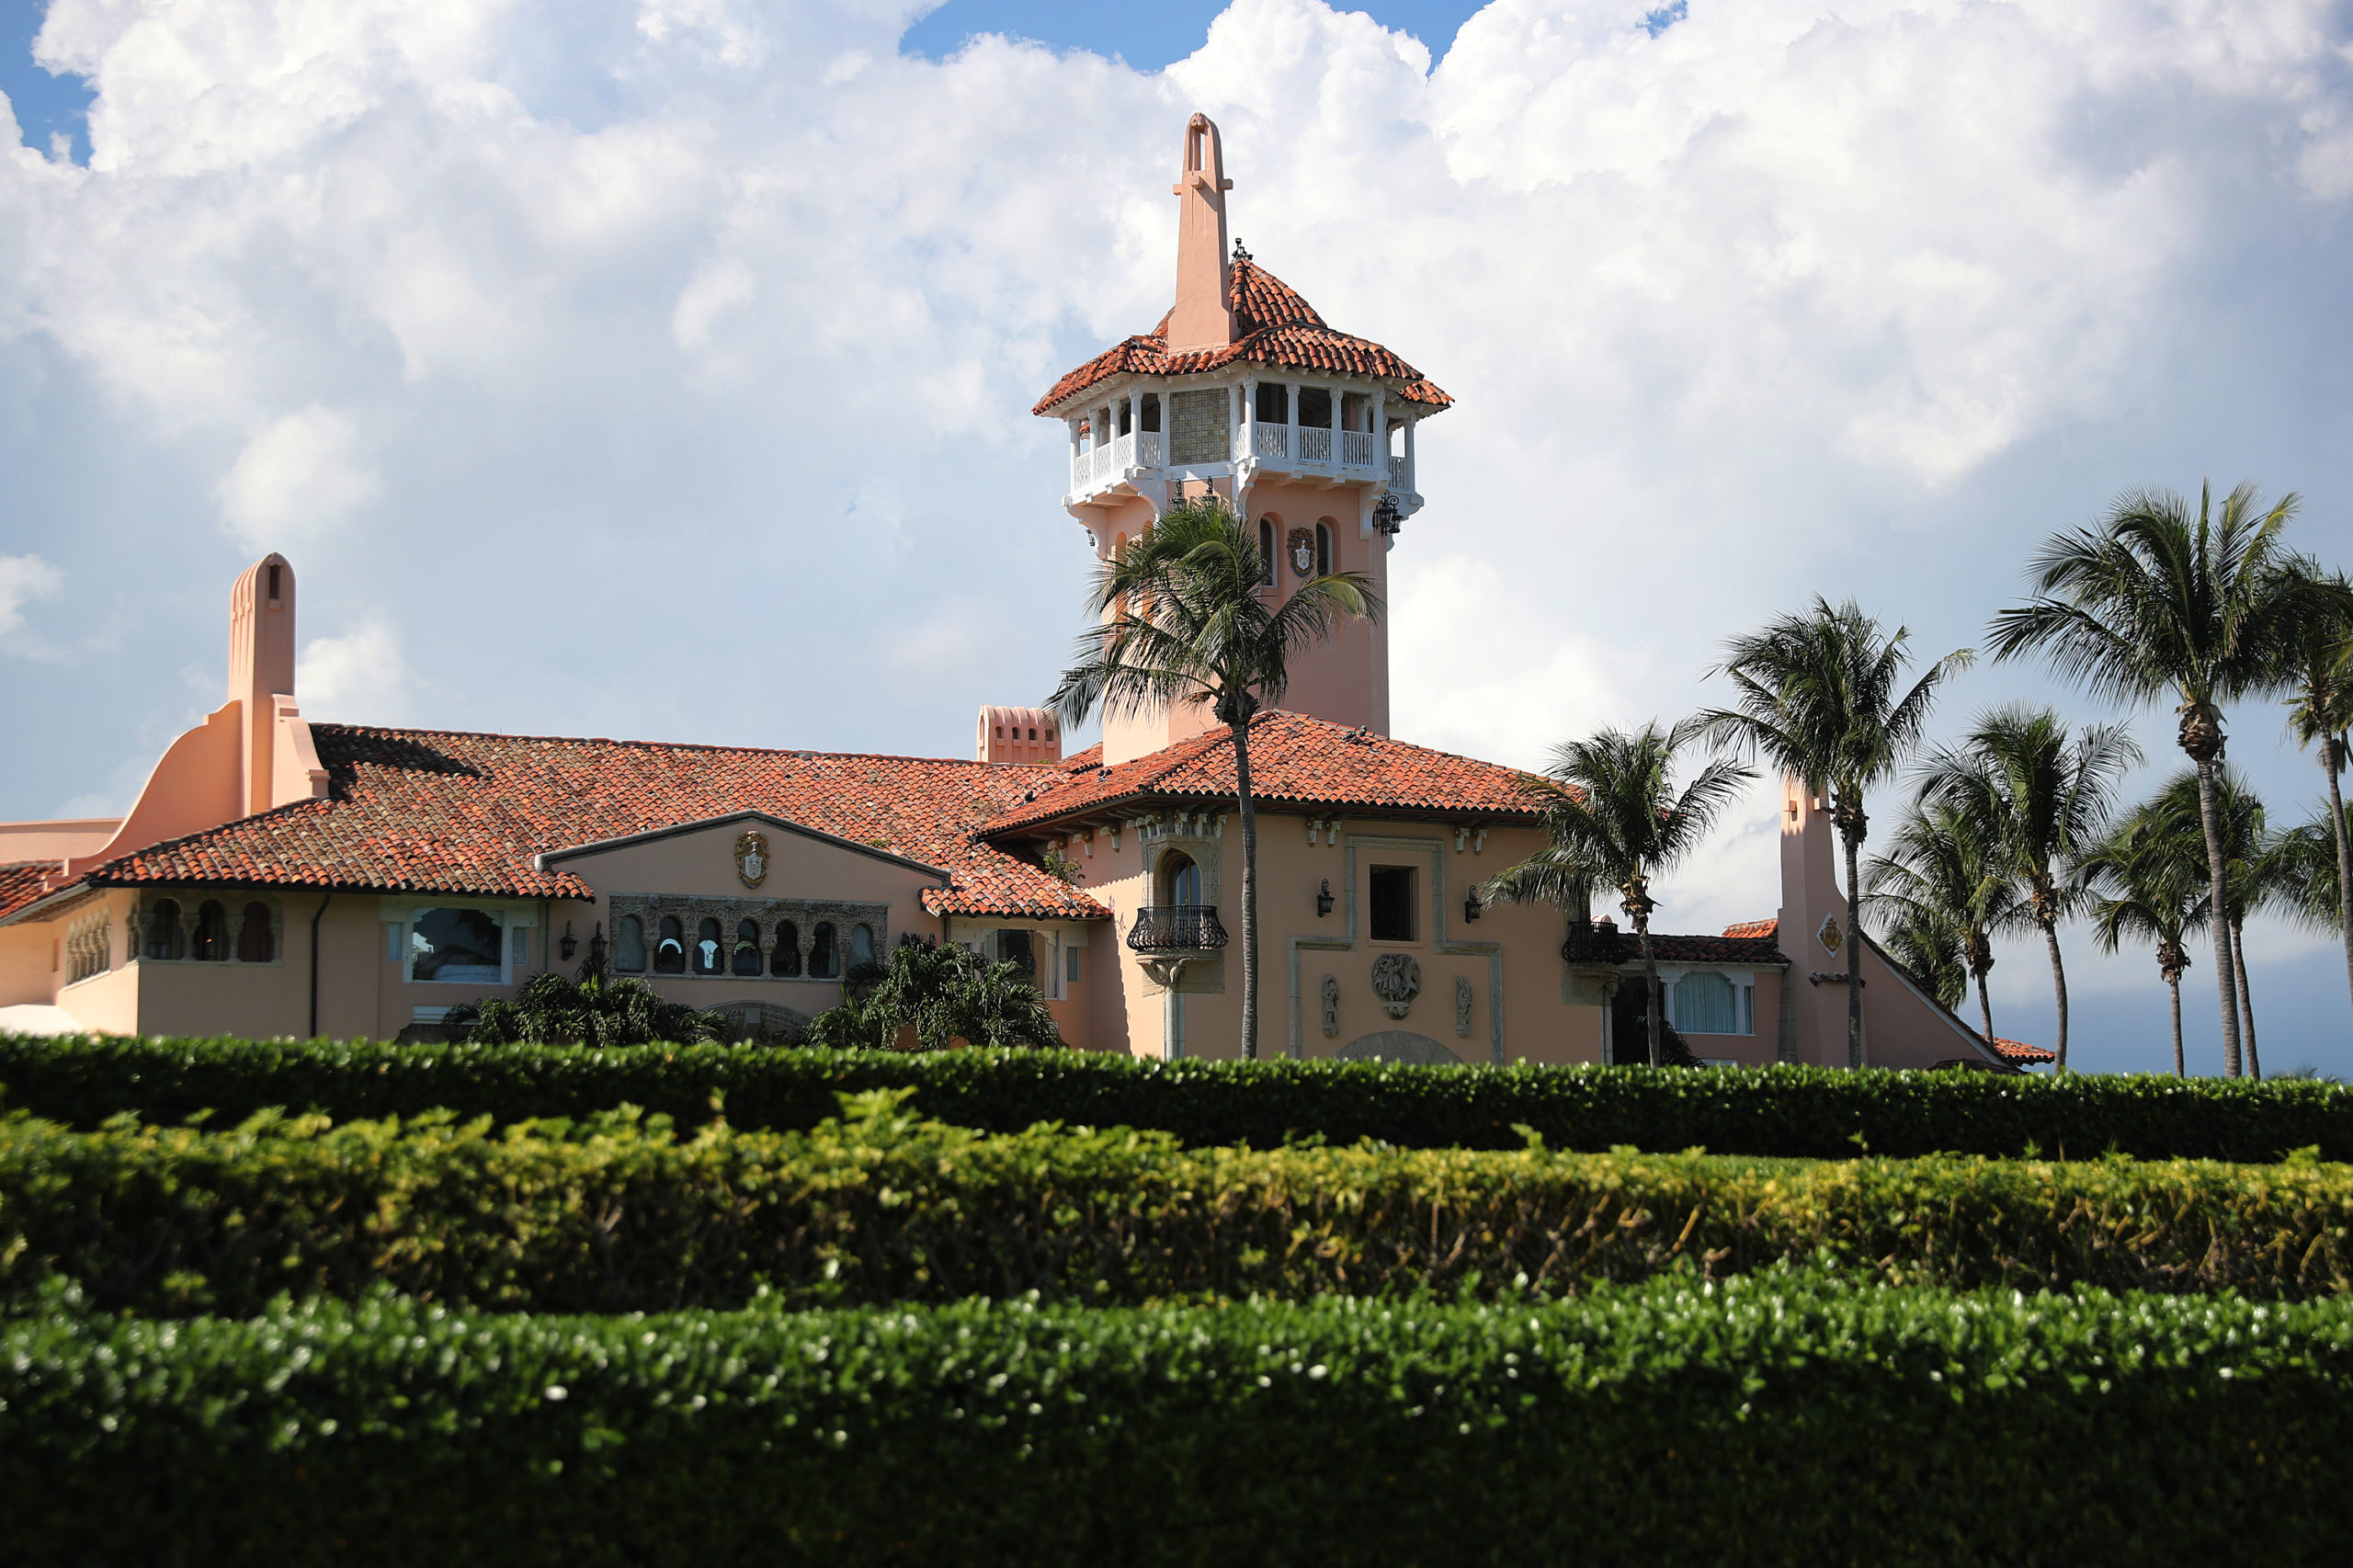 PALM BEACH, FLORIDA - NOVEMBER 01: President Donald Trump's Mar-a-Lago resort is seen on November 1, 2019 in Palm Beach, Florida. President Trump announced that he will be moving from New York and making Palm Beach, Florida his permanent residence. (Photo by Joe Raedle/Getty Images)